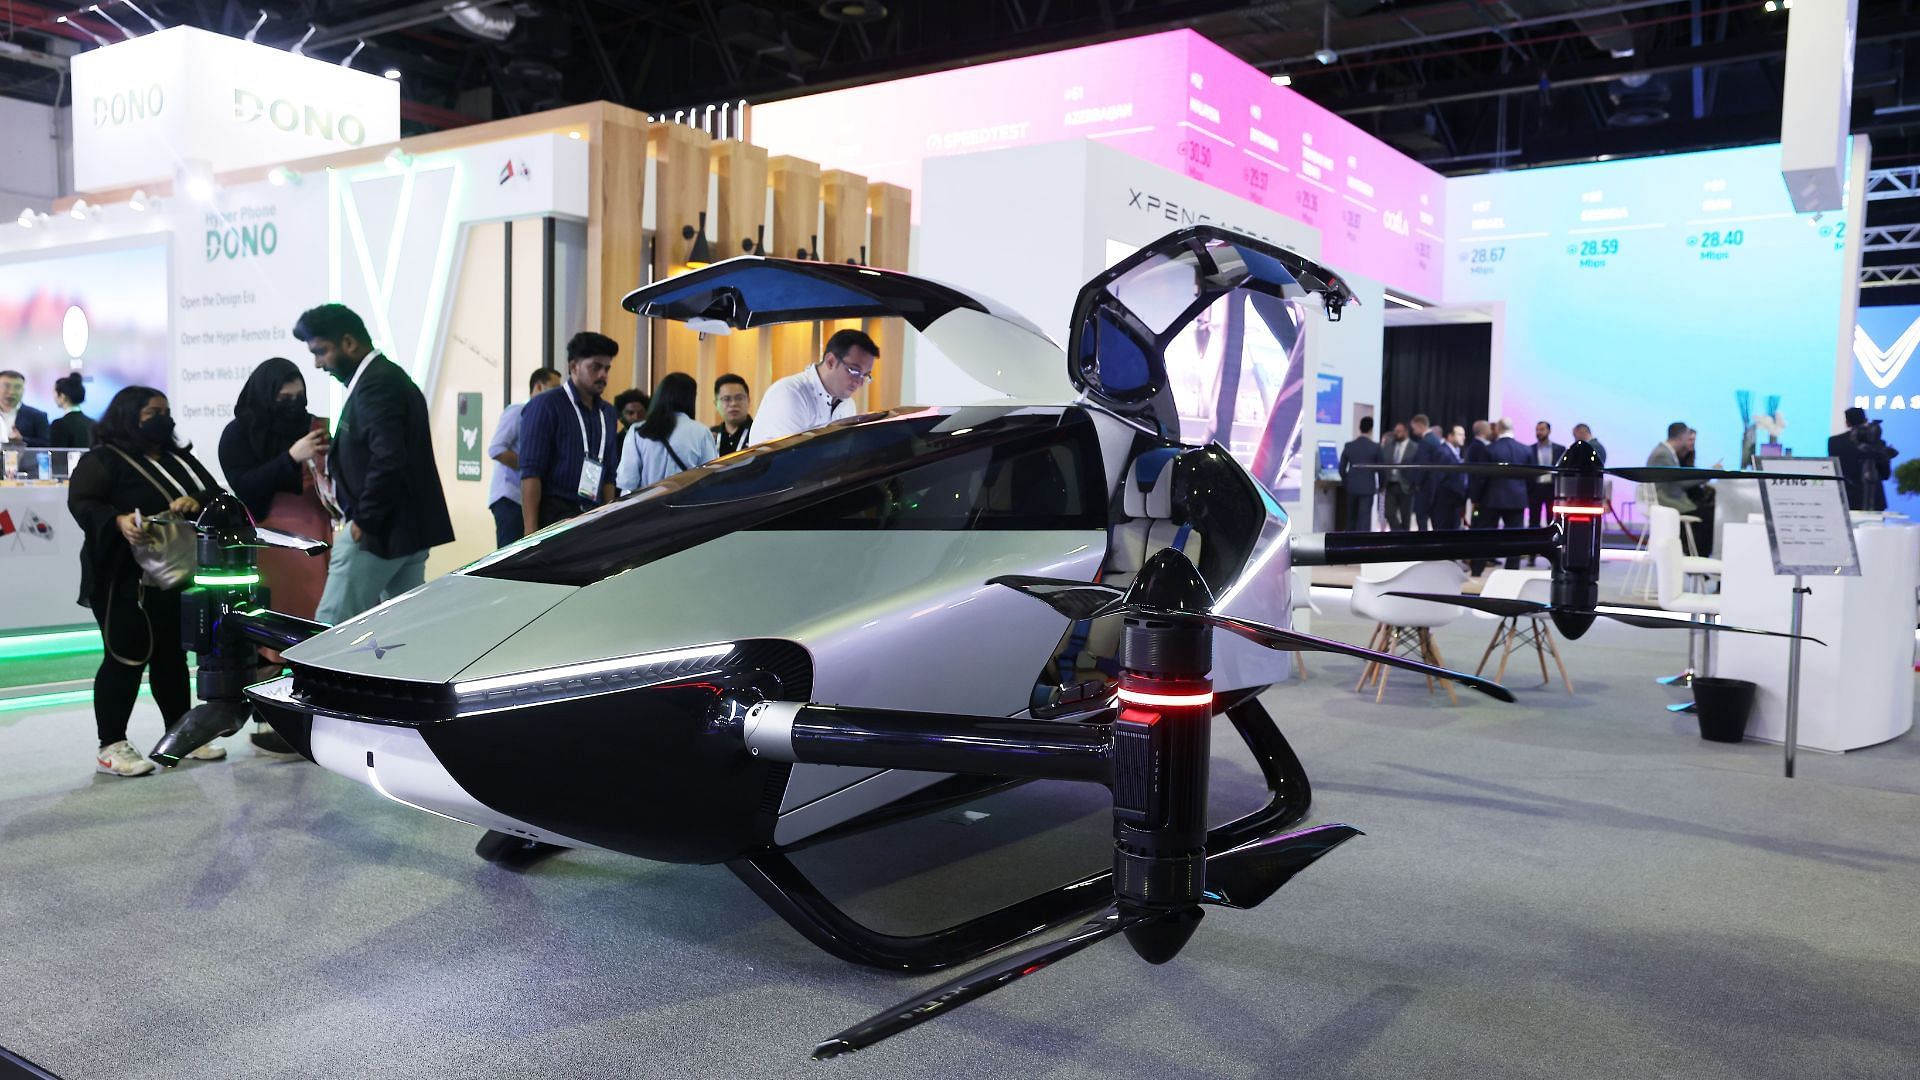 Here&#039;s a look at the Xpeng X2 with its gull-wing doors open (Image via aeroht.com)